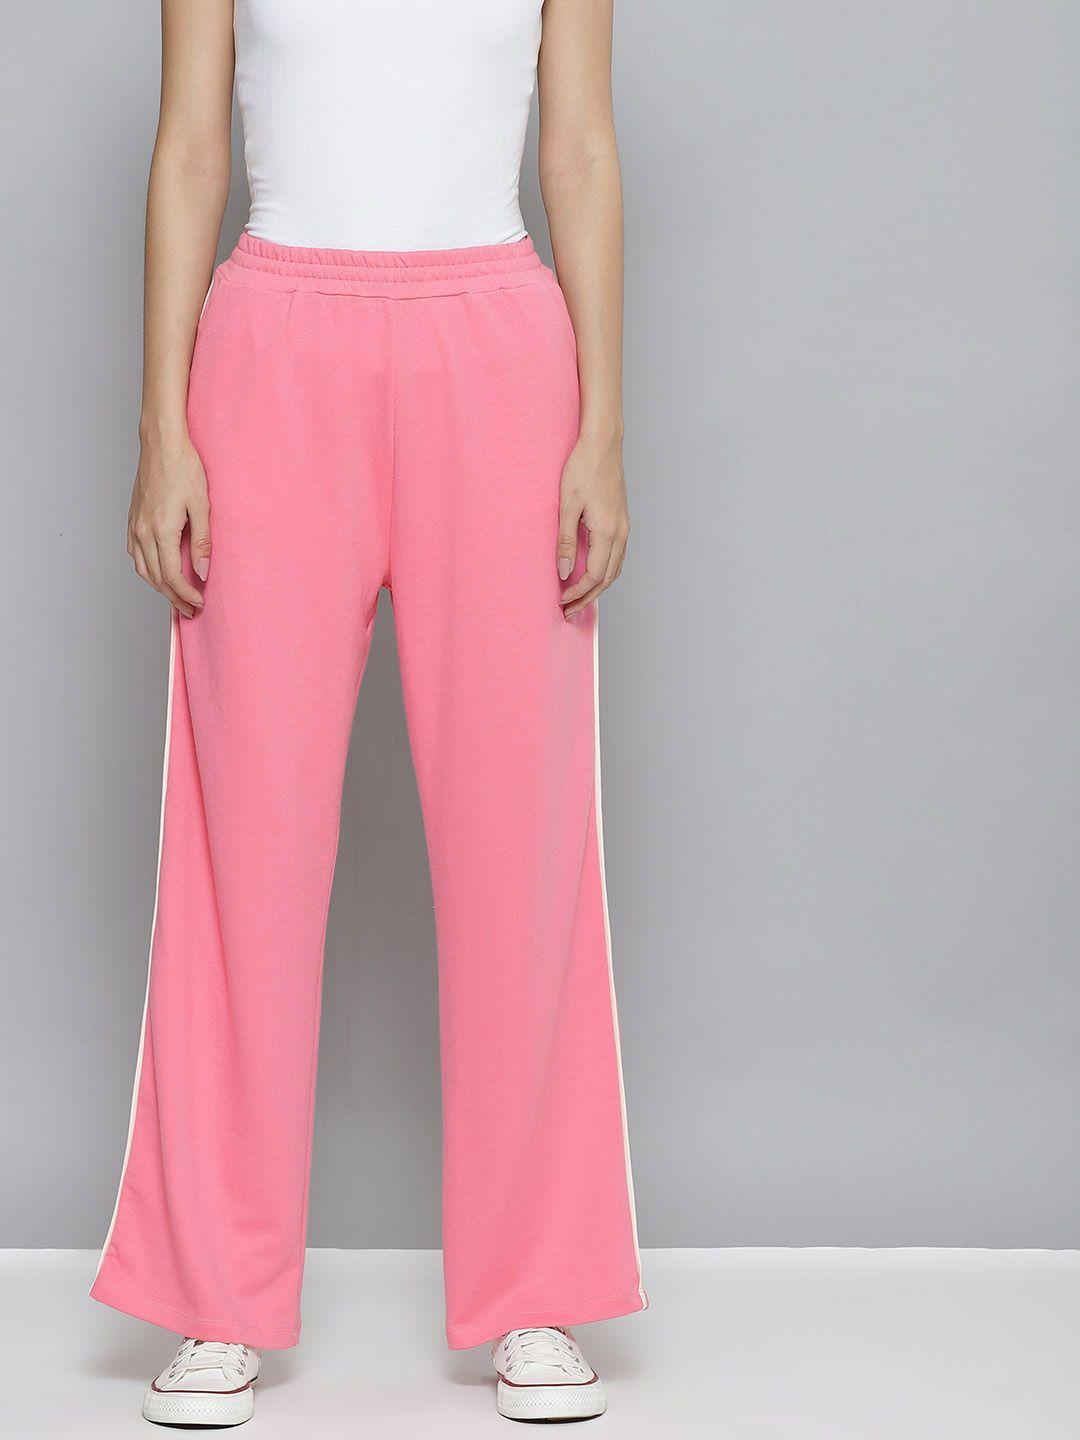 sassafras-women-pink-solid-straight-fit-track-pants